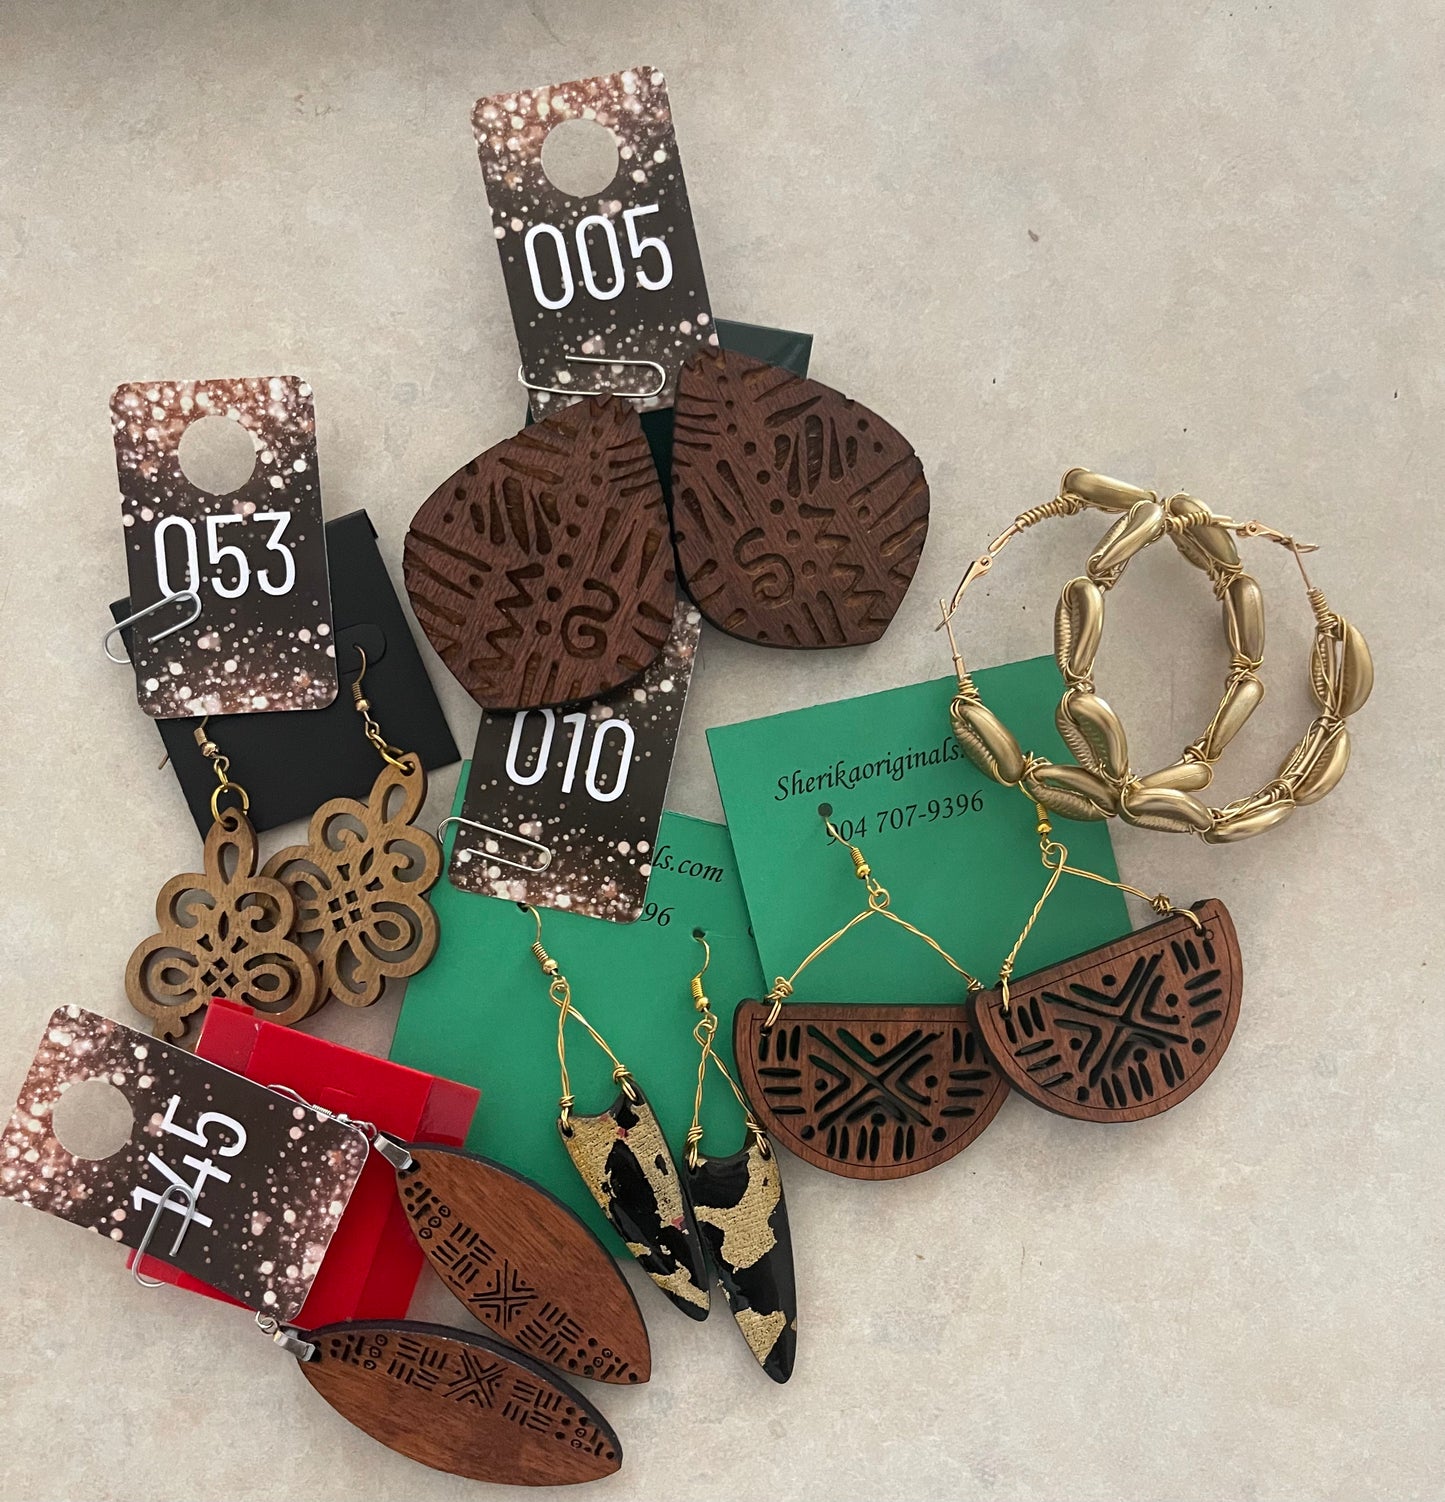 6 pairs of earrings from $10.00 sale to Liasha